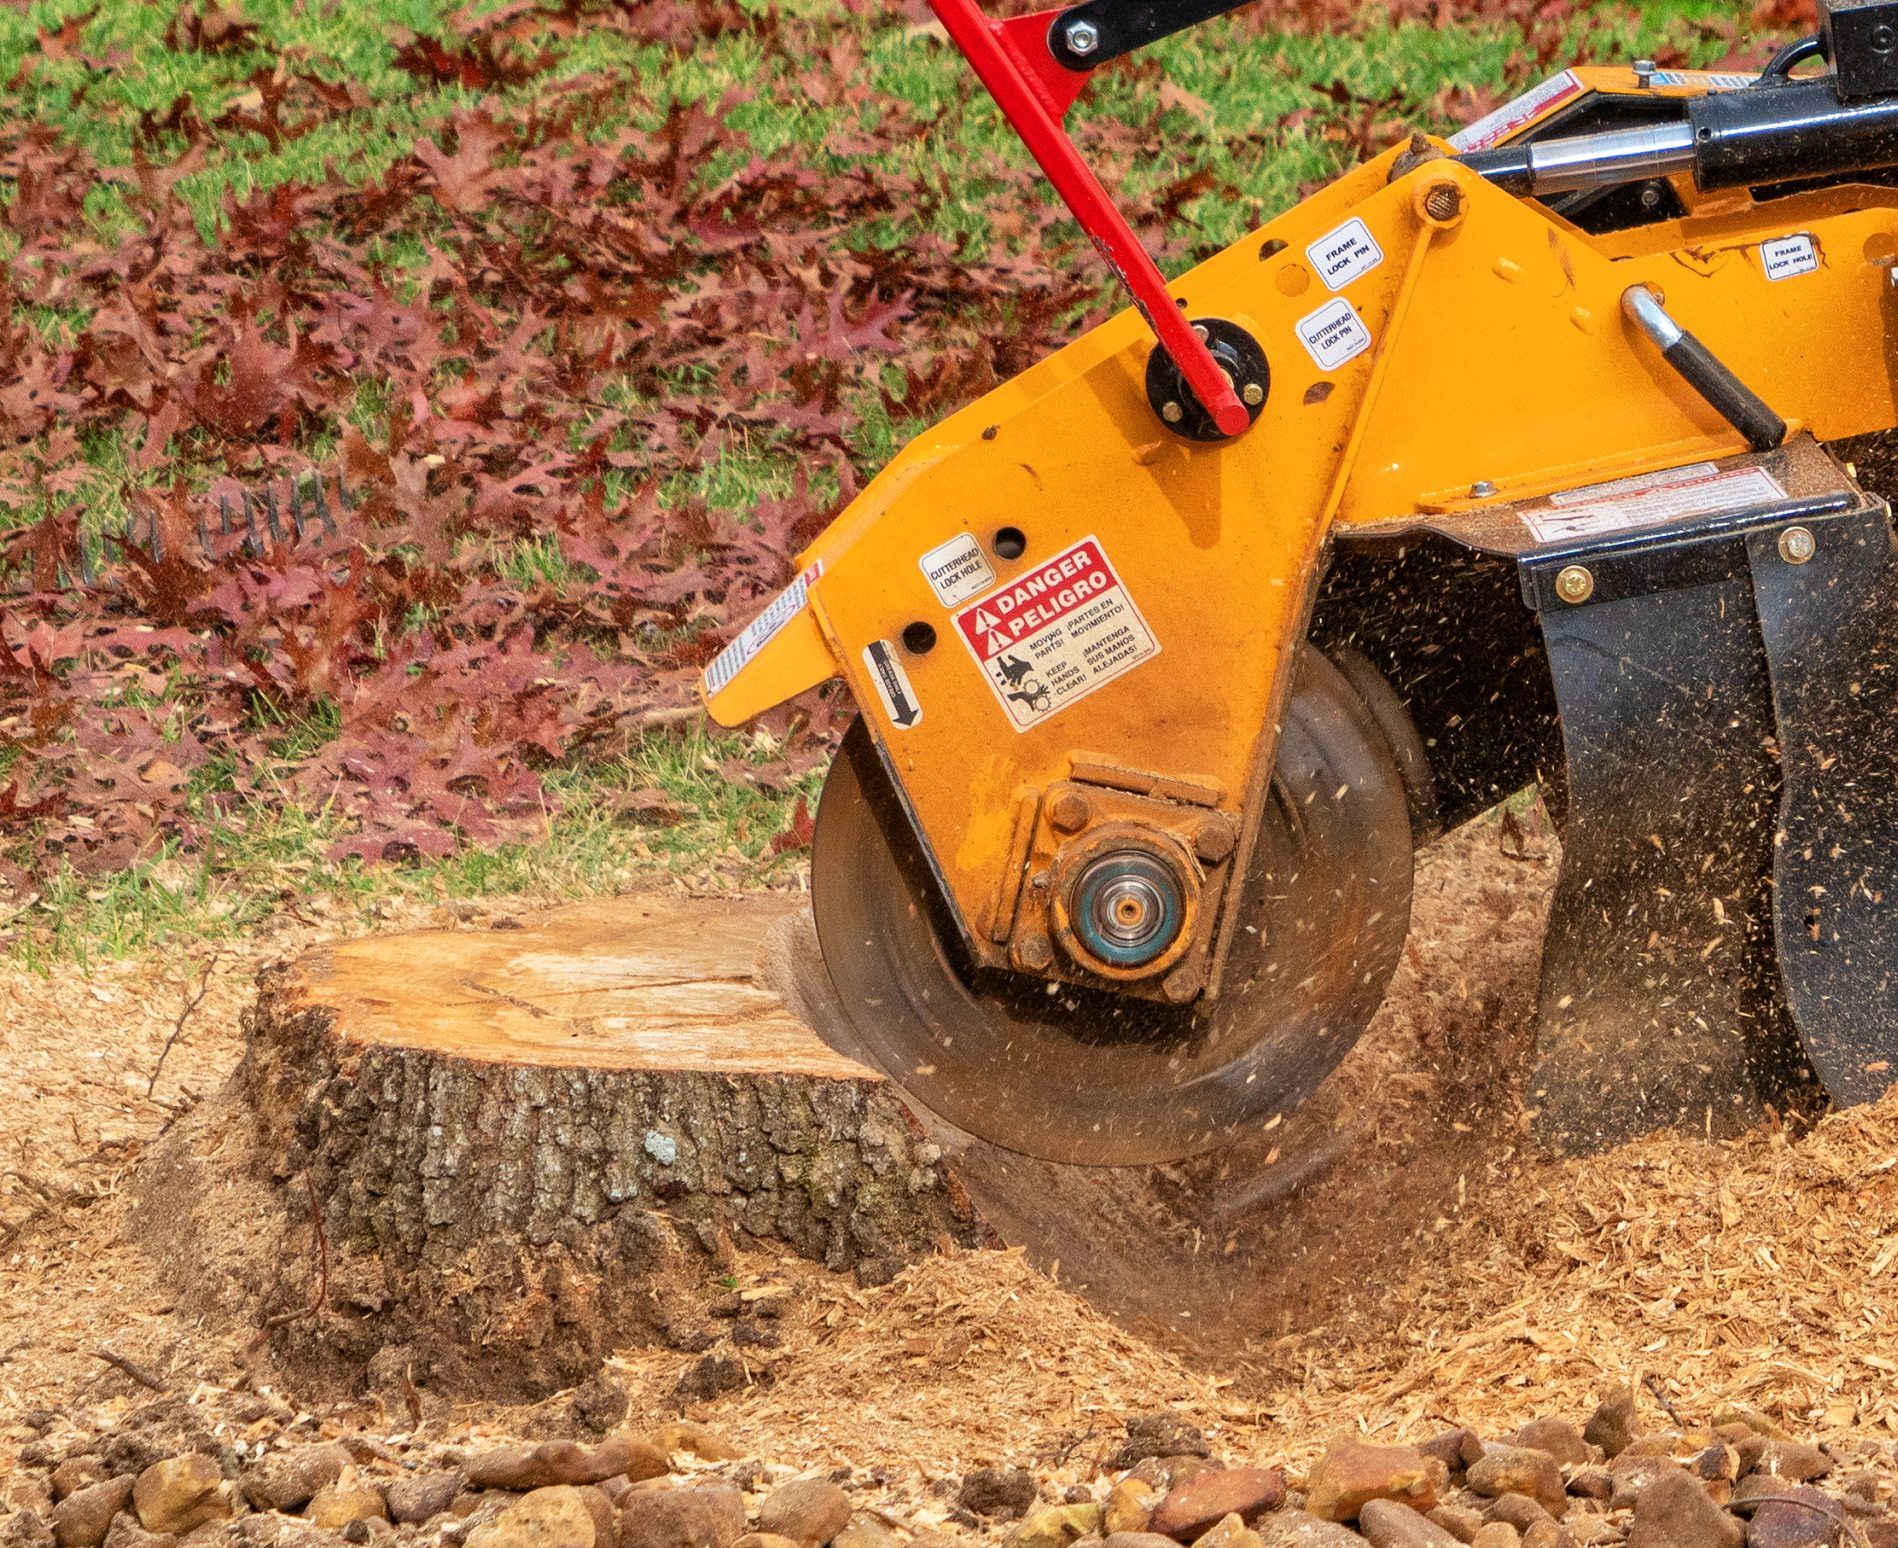 Best Tree Services Company in Ohio - Stump Grinding